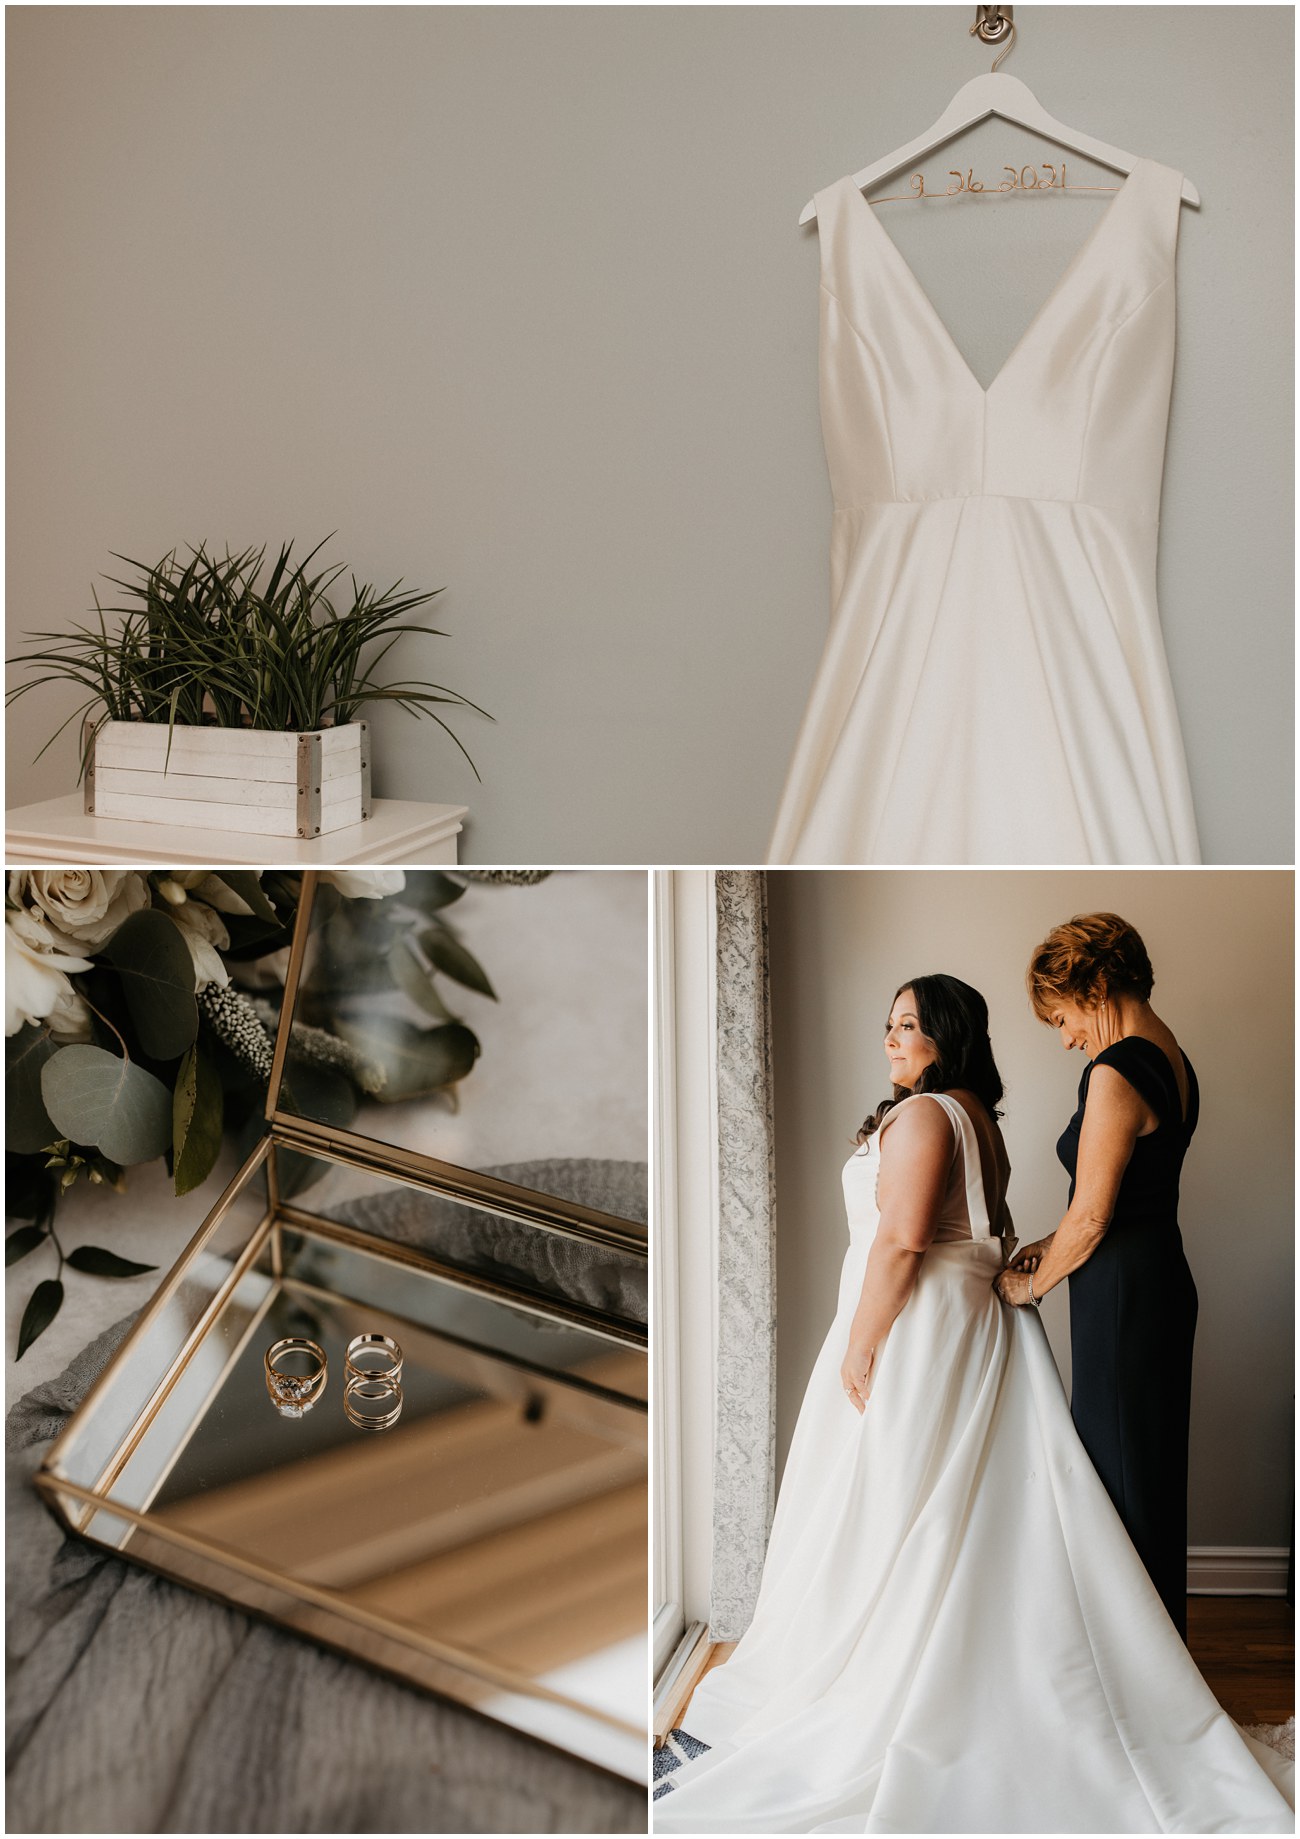 Collage of bridal details and Bride getting dressed